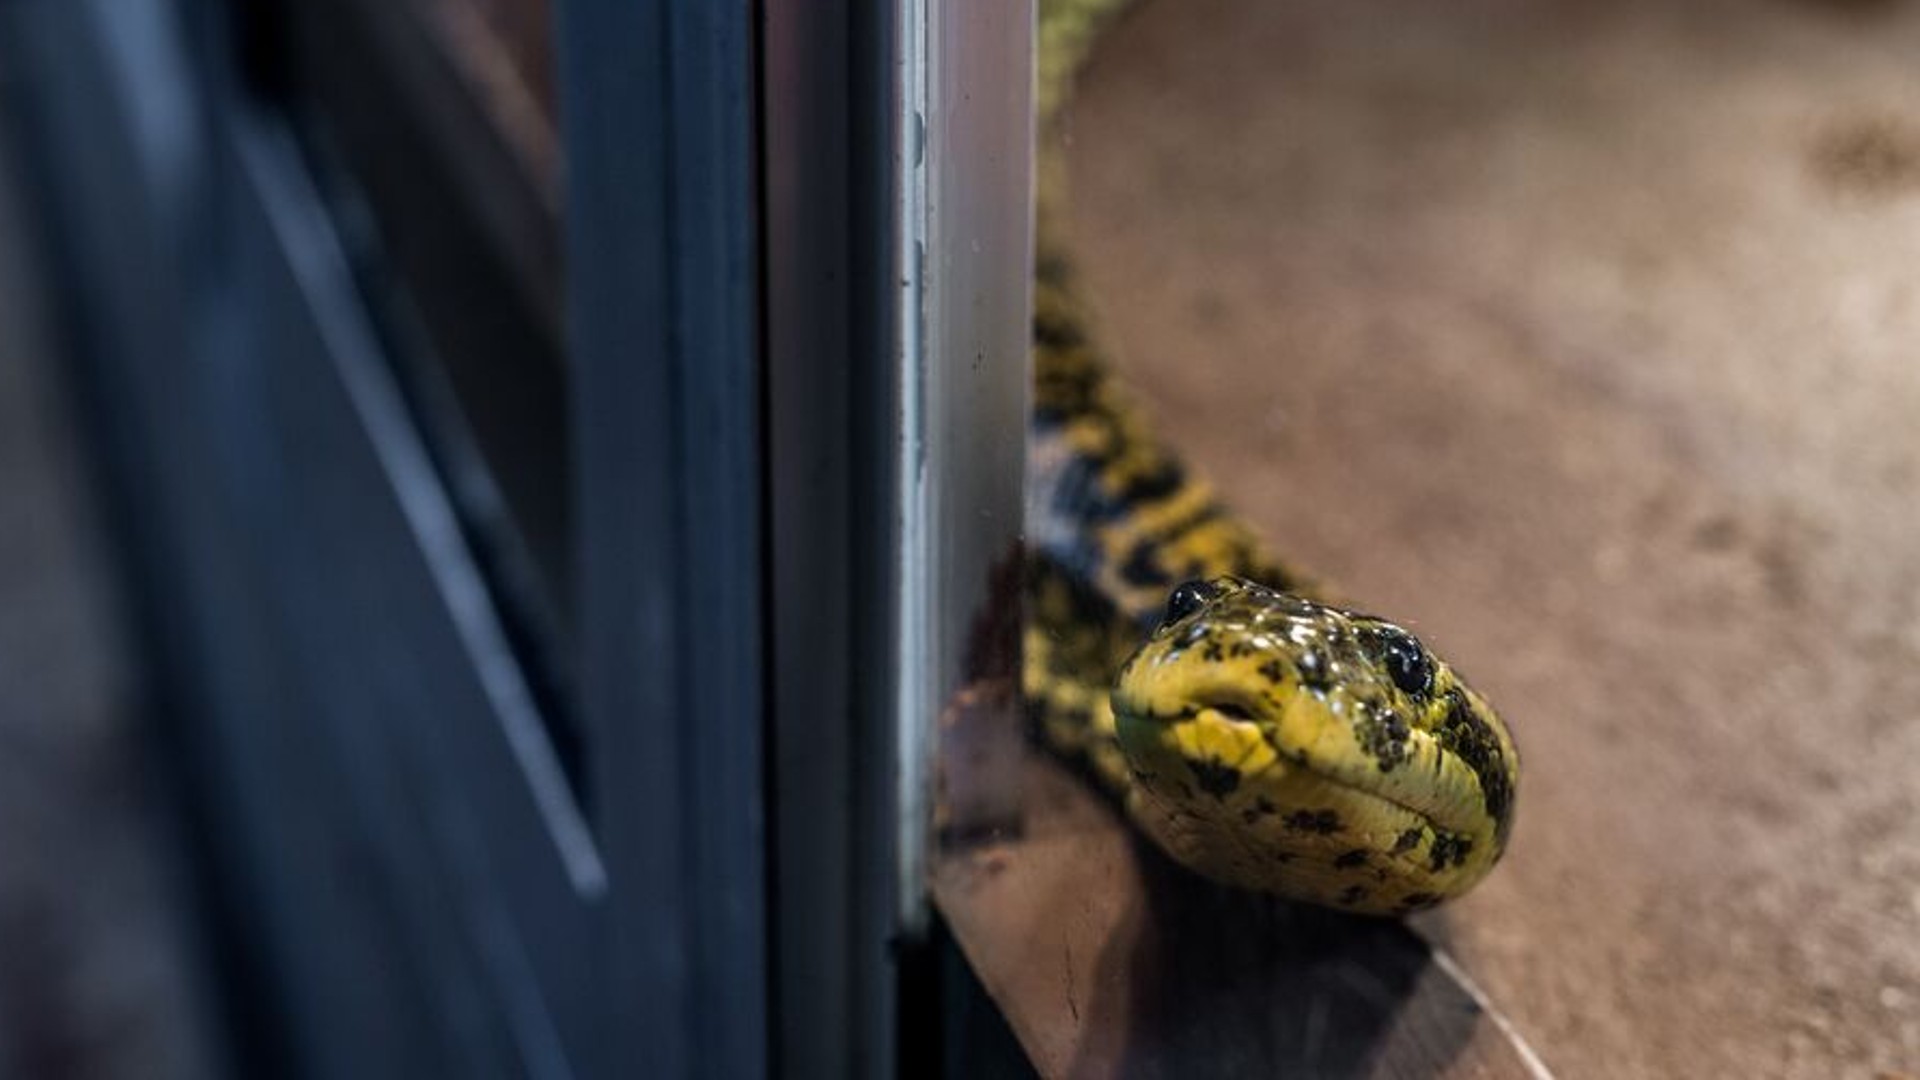 A yellow snake in a glass case